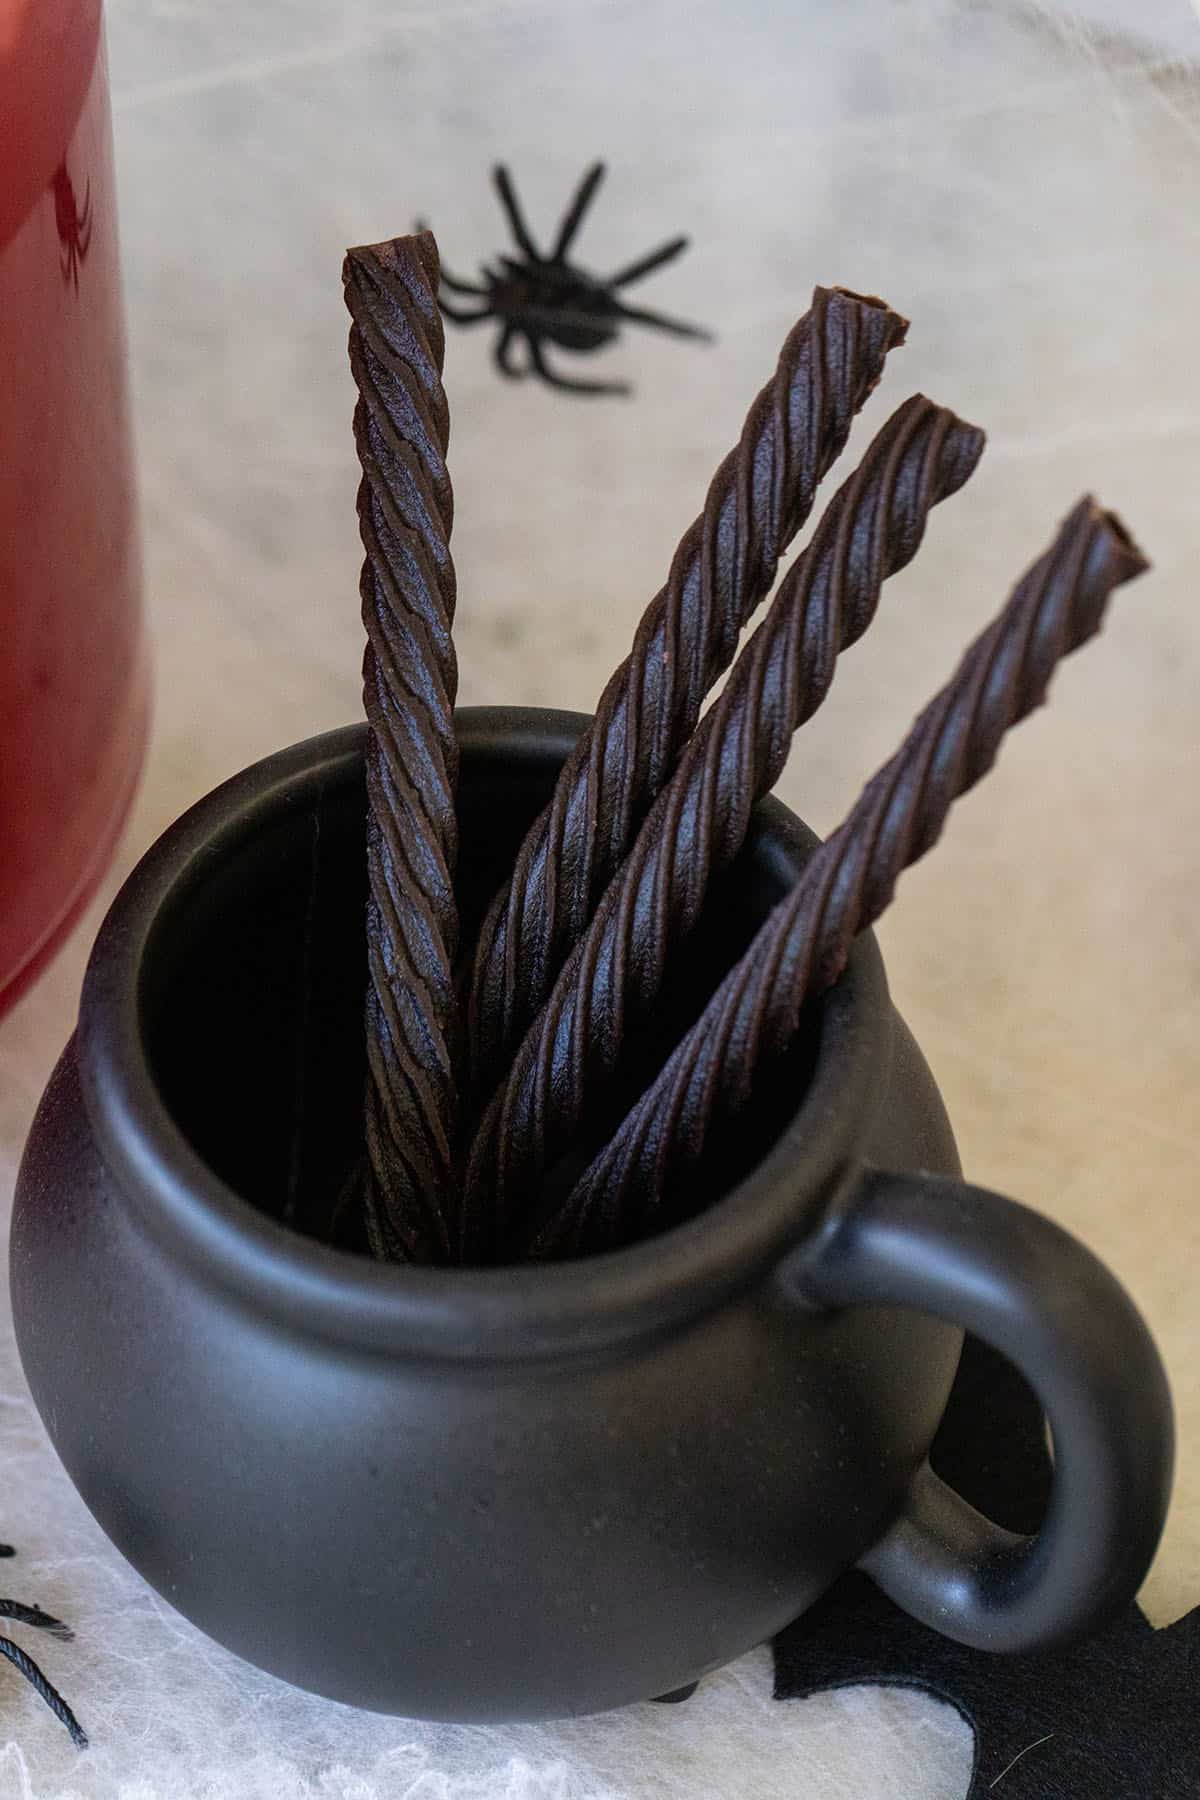 candy straws in a small cauldron.